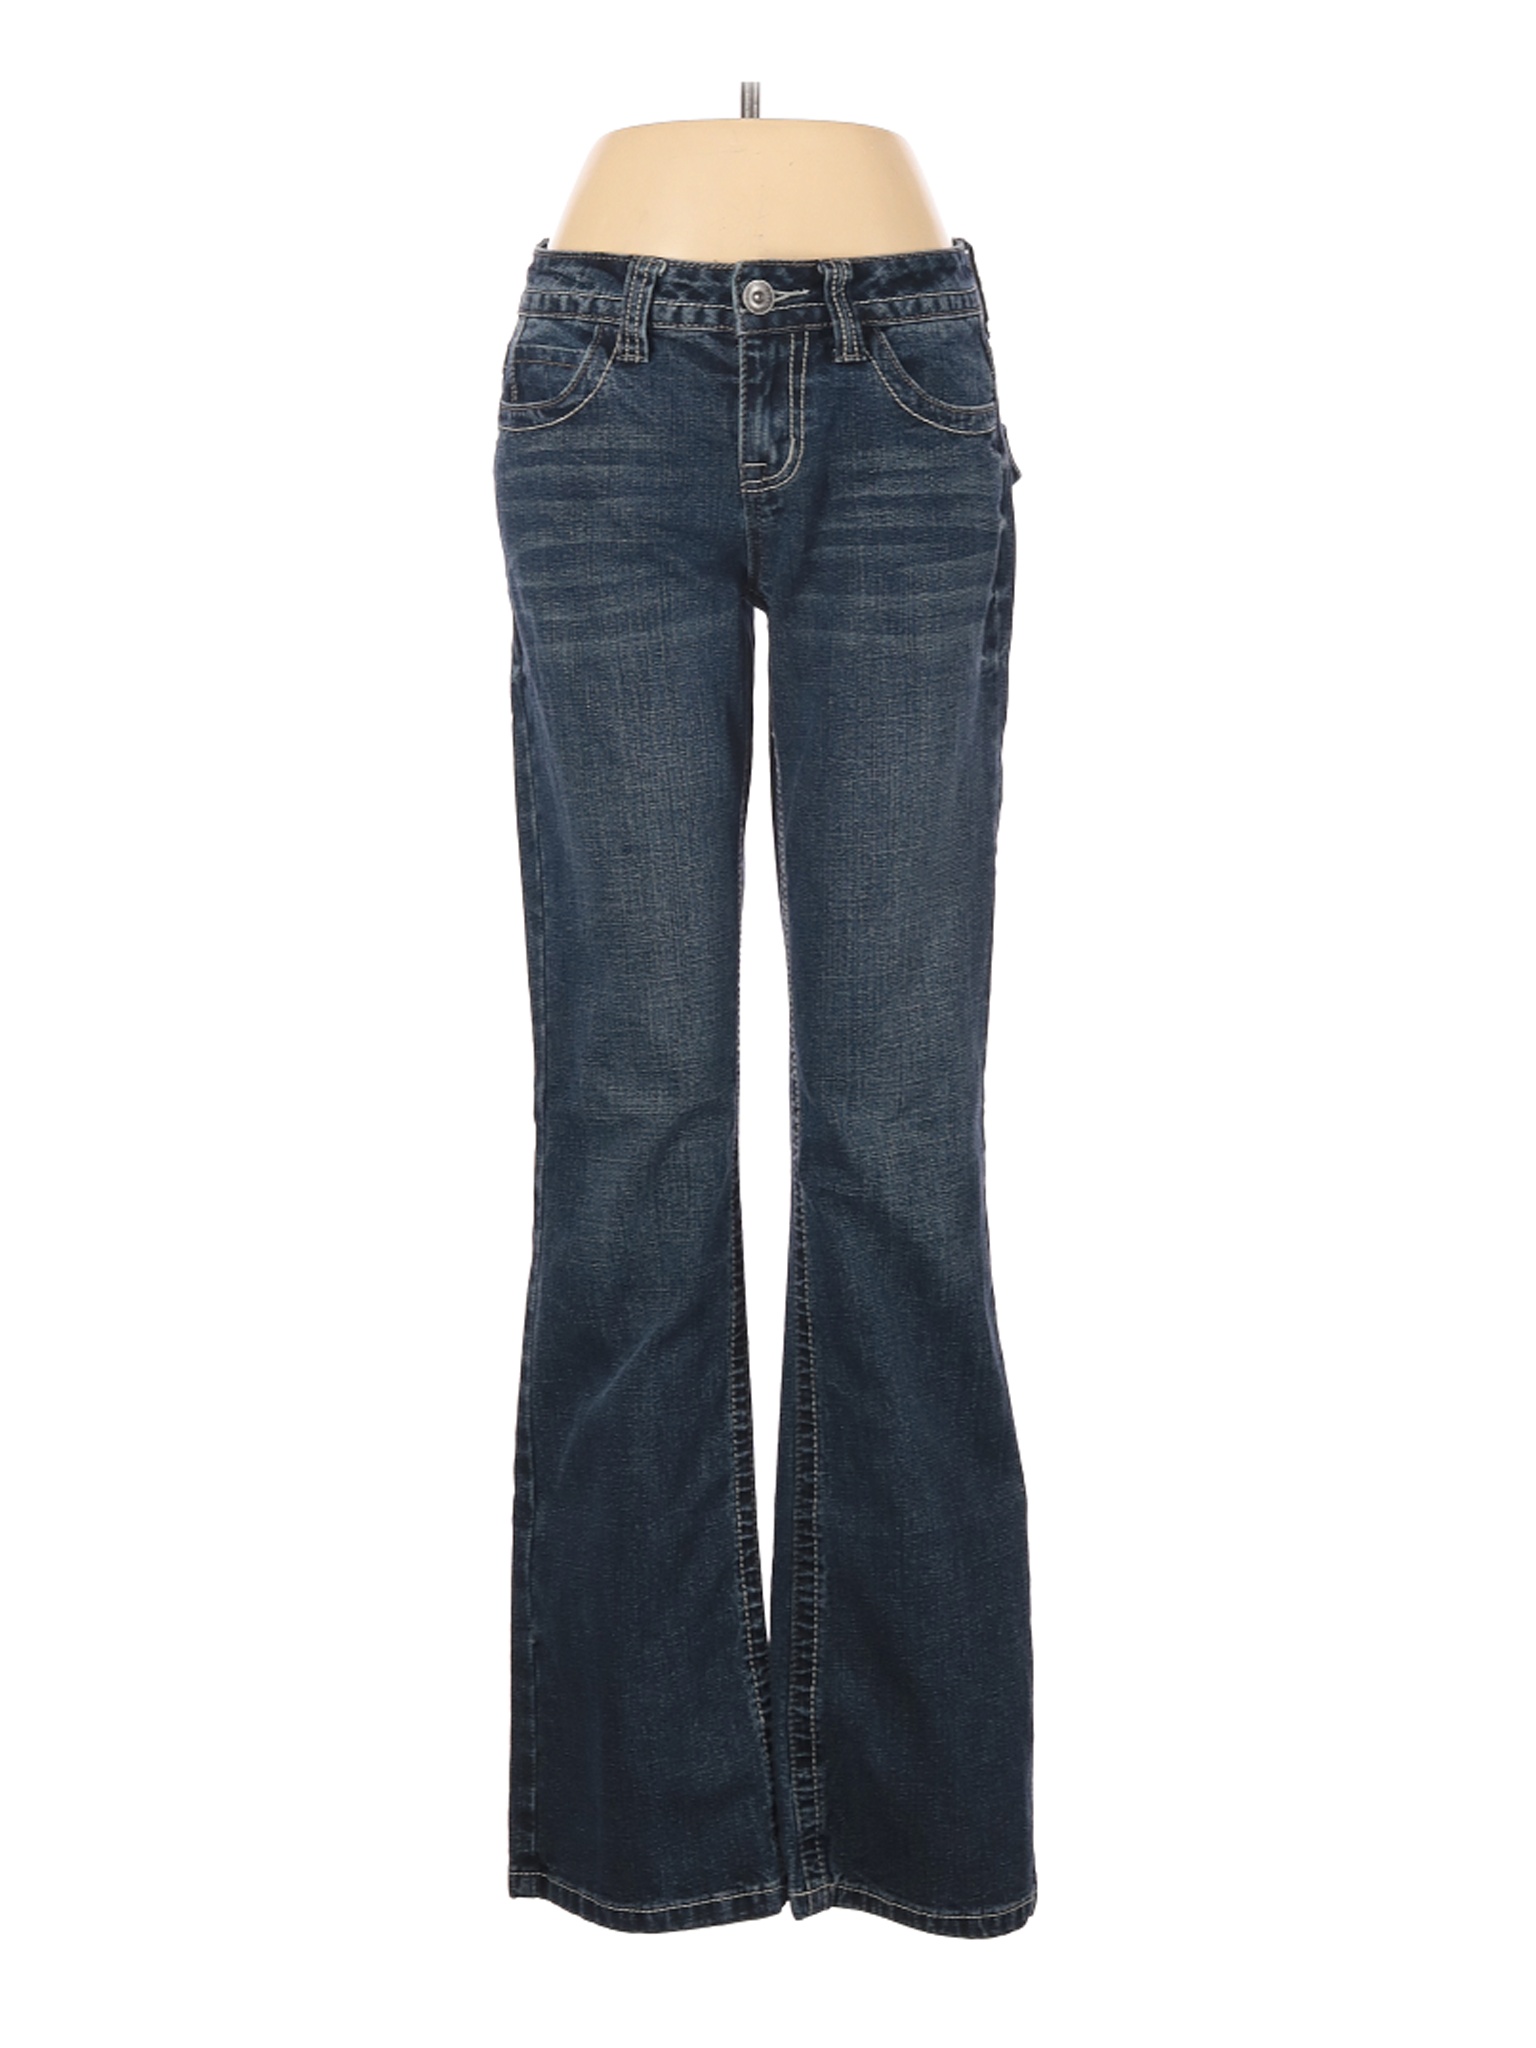 Natural Reflections Women Blue Jeans 4 | eBay